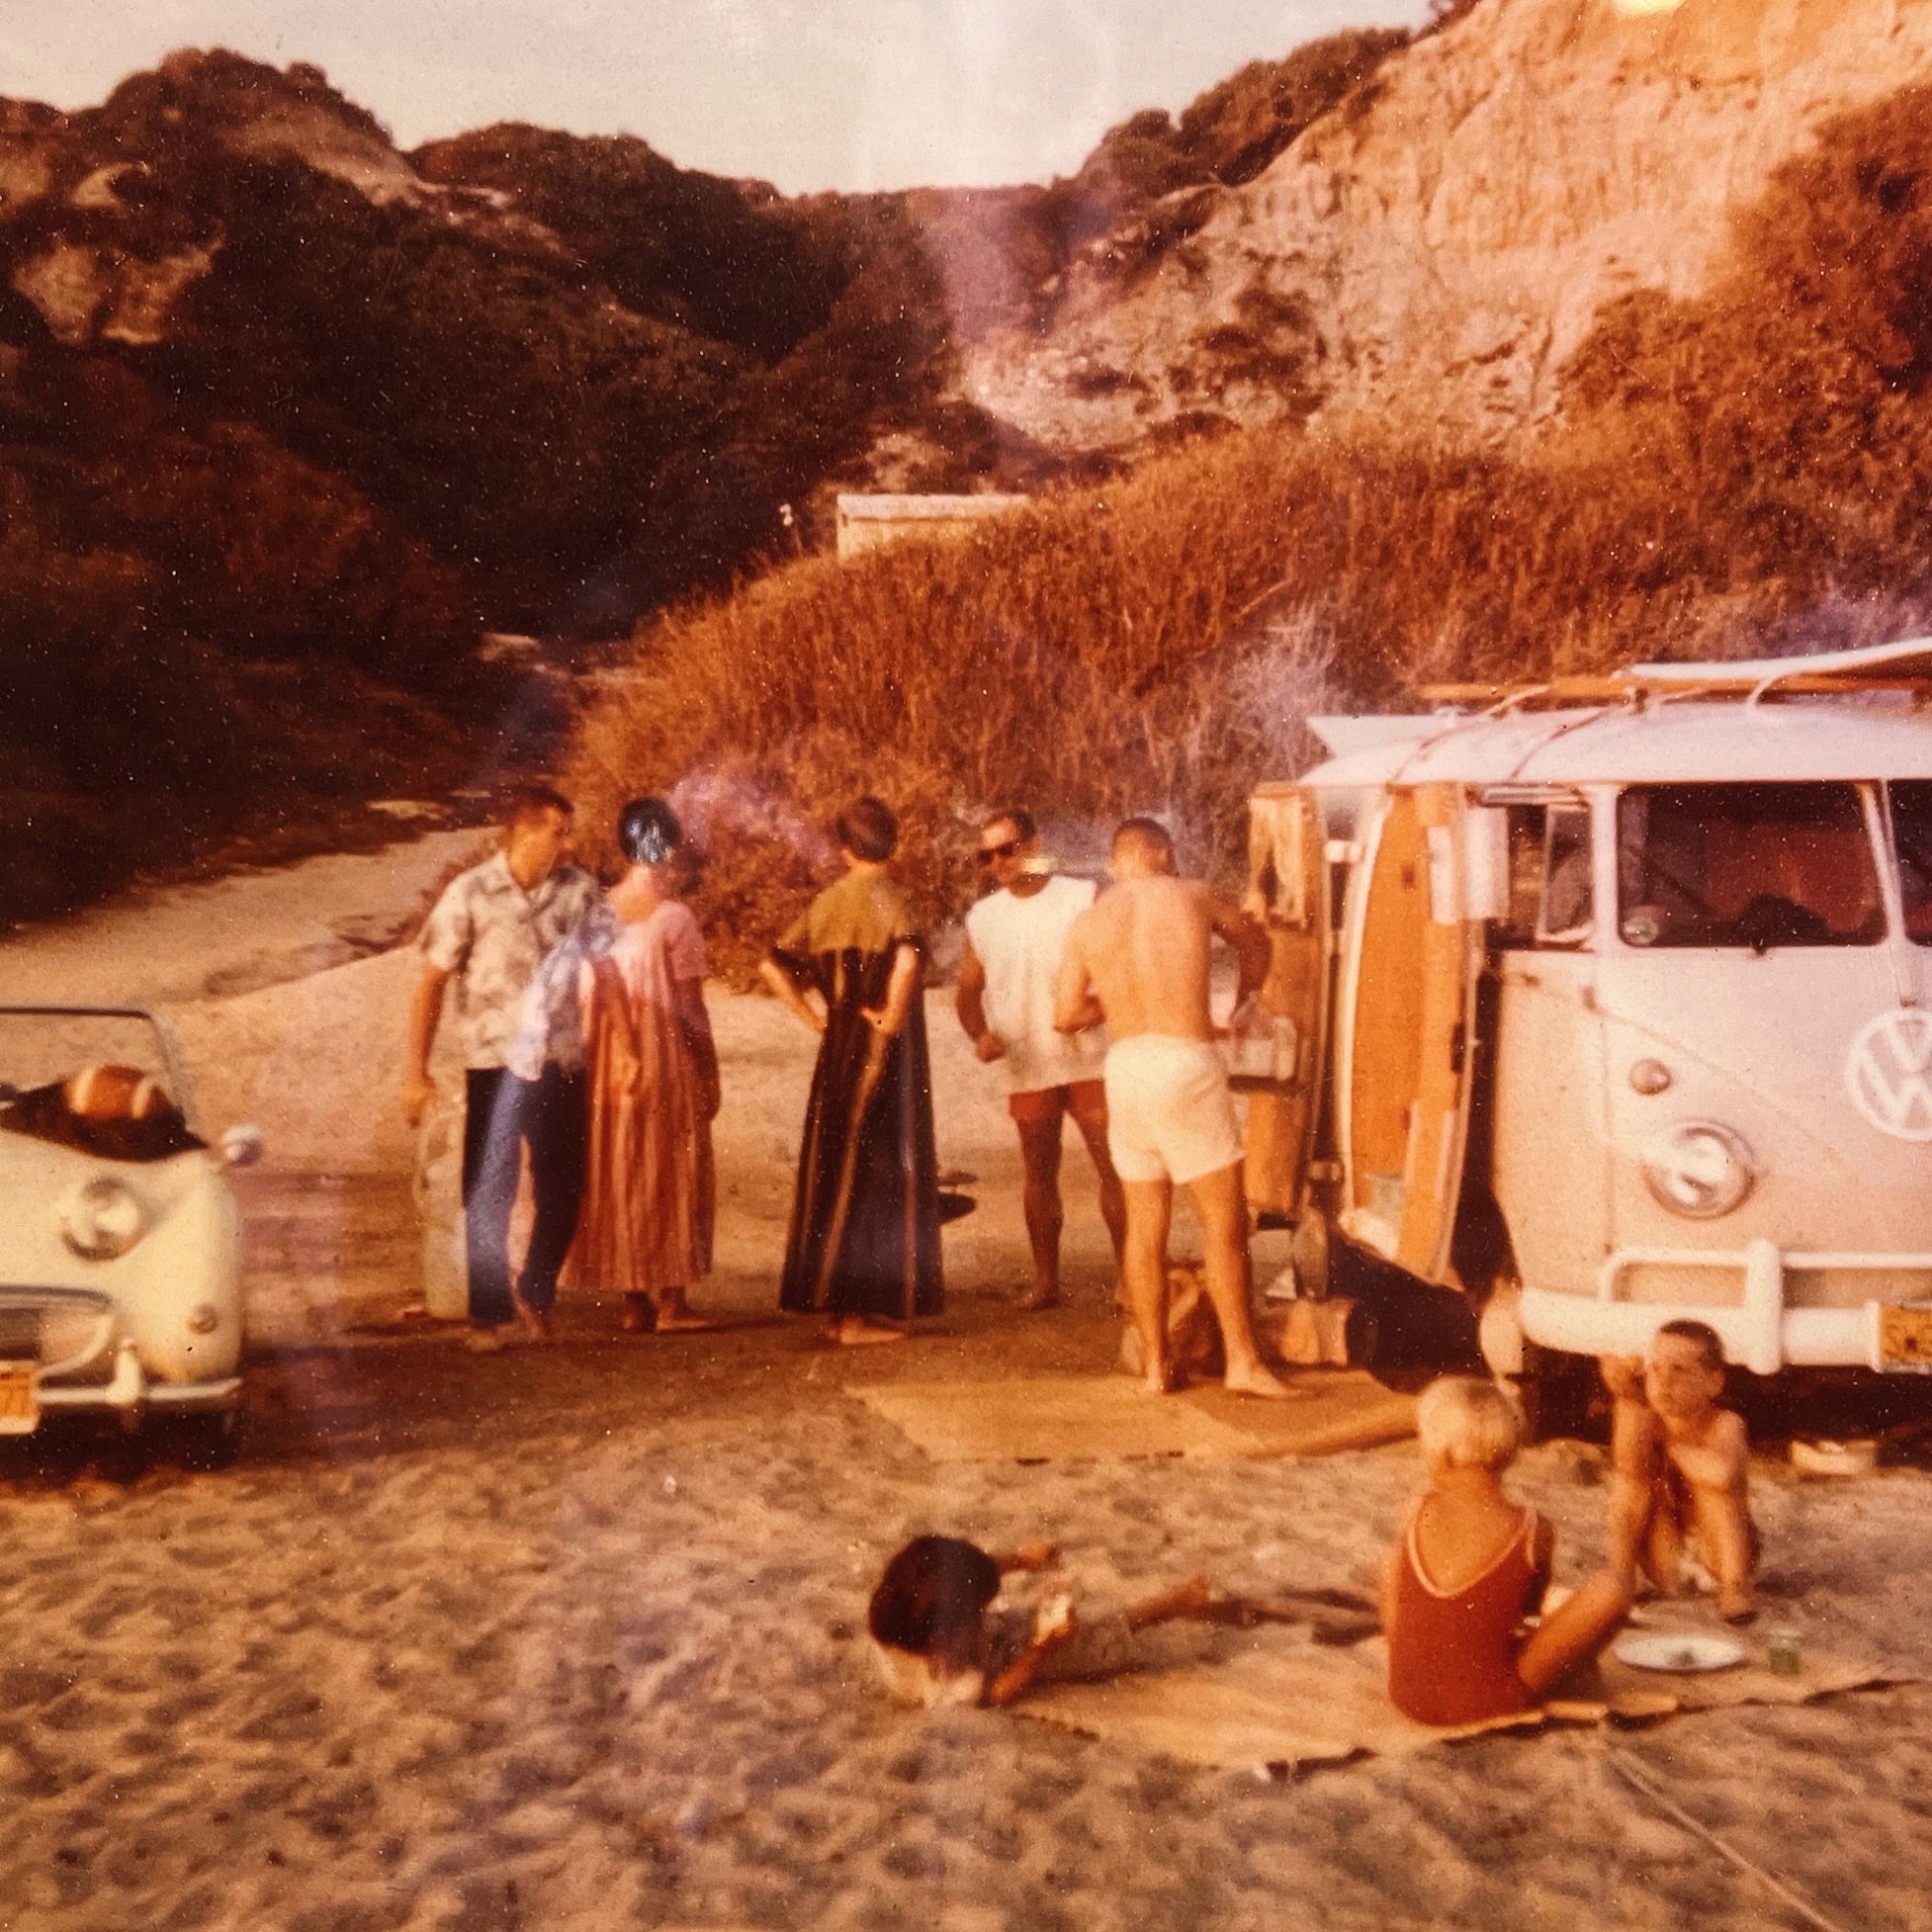 San Onofre State Beach, early sixties I&rsquo;m guessing cuz the kids on the blanket in the foreground were born in 1955. Bill&rsquo;s twin Bro n Sis, Kenny and Patty.

This is the first VW bus that Bill ever experienced. That&rsquo;s his dad Bill, w